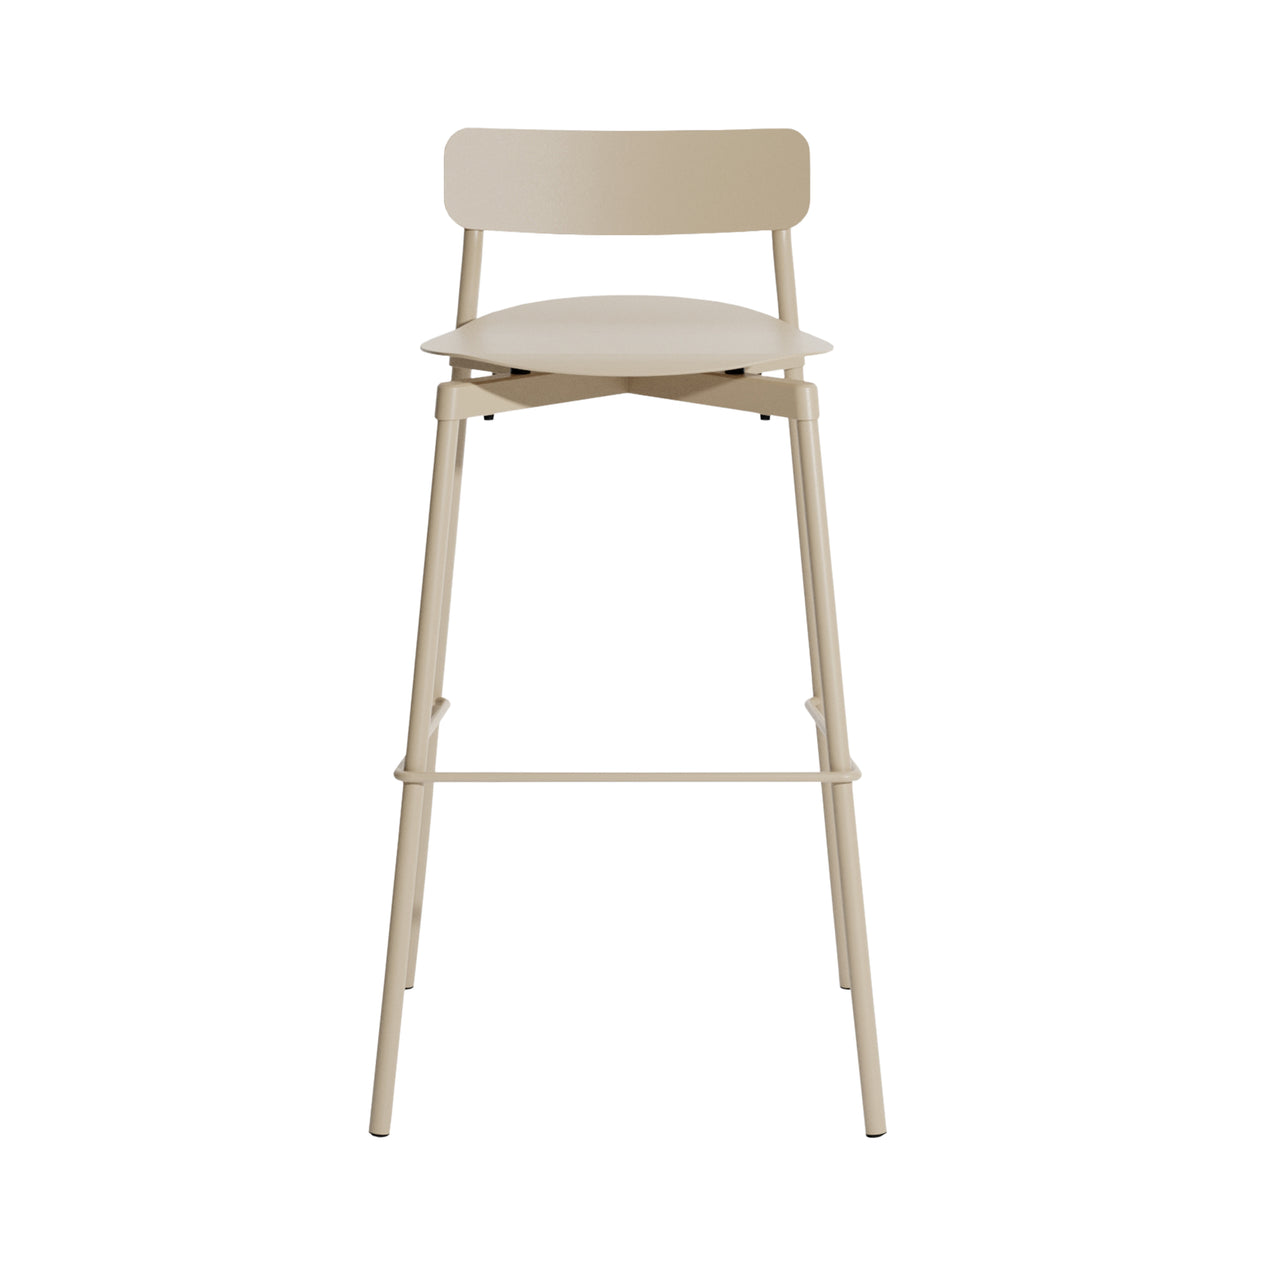  Fromme Stacking Bar + Counter Stool: Bar + Dune